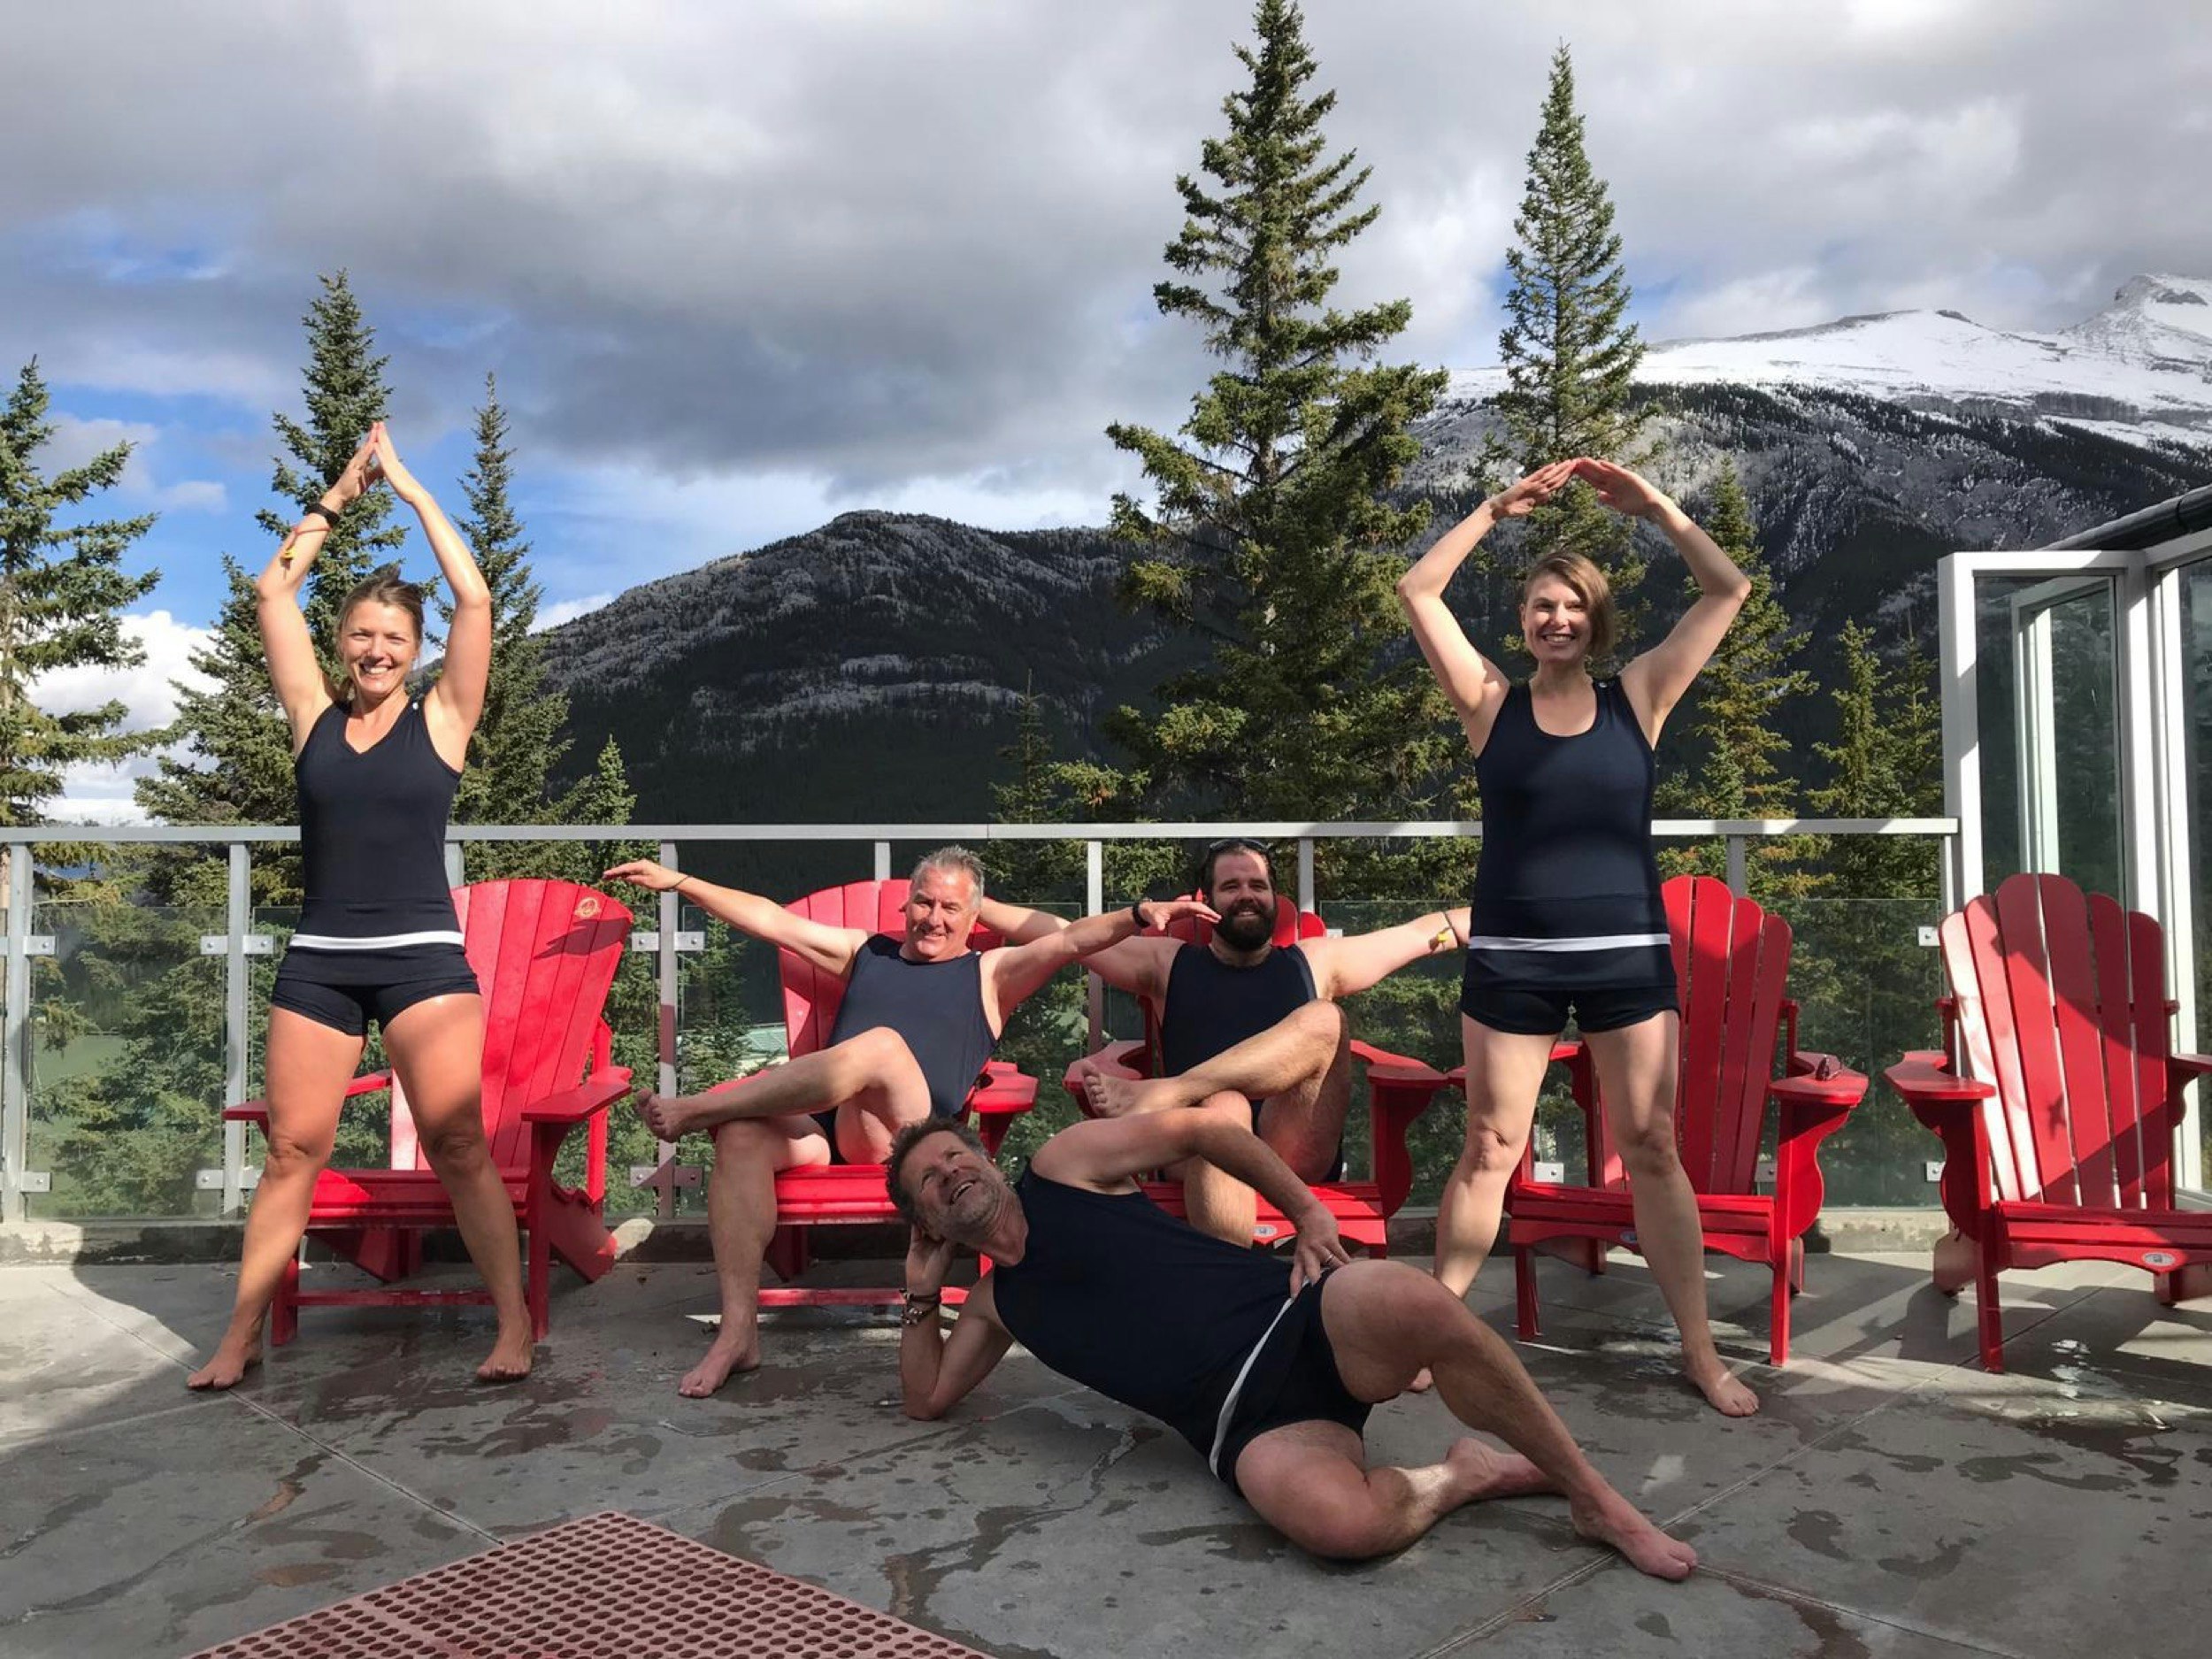 People make crazy poses next to a hot spring while wearing silly bathing suits during winter at Banff and Lake Louise